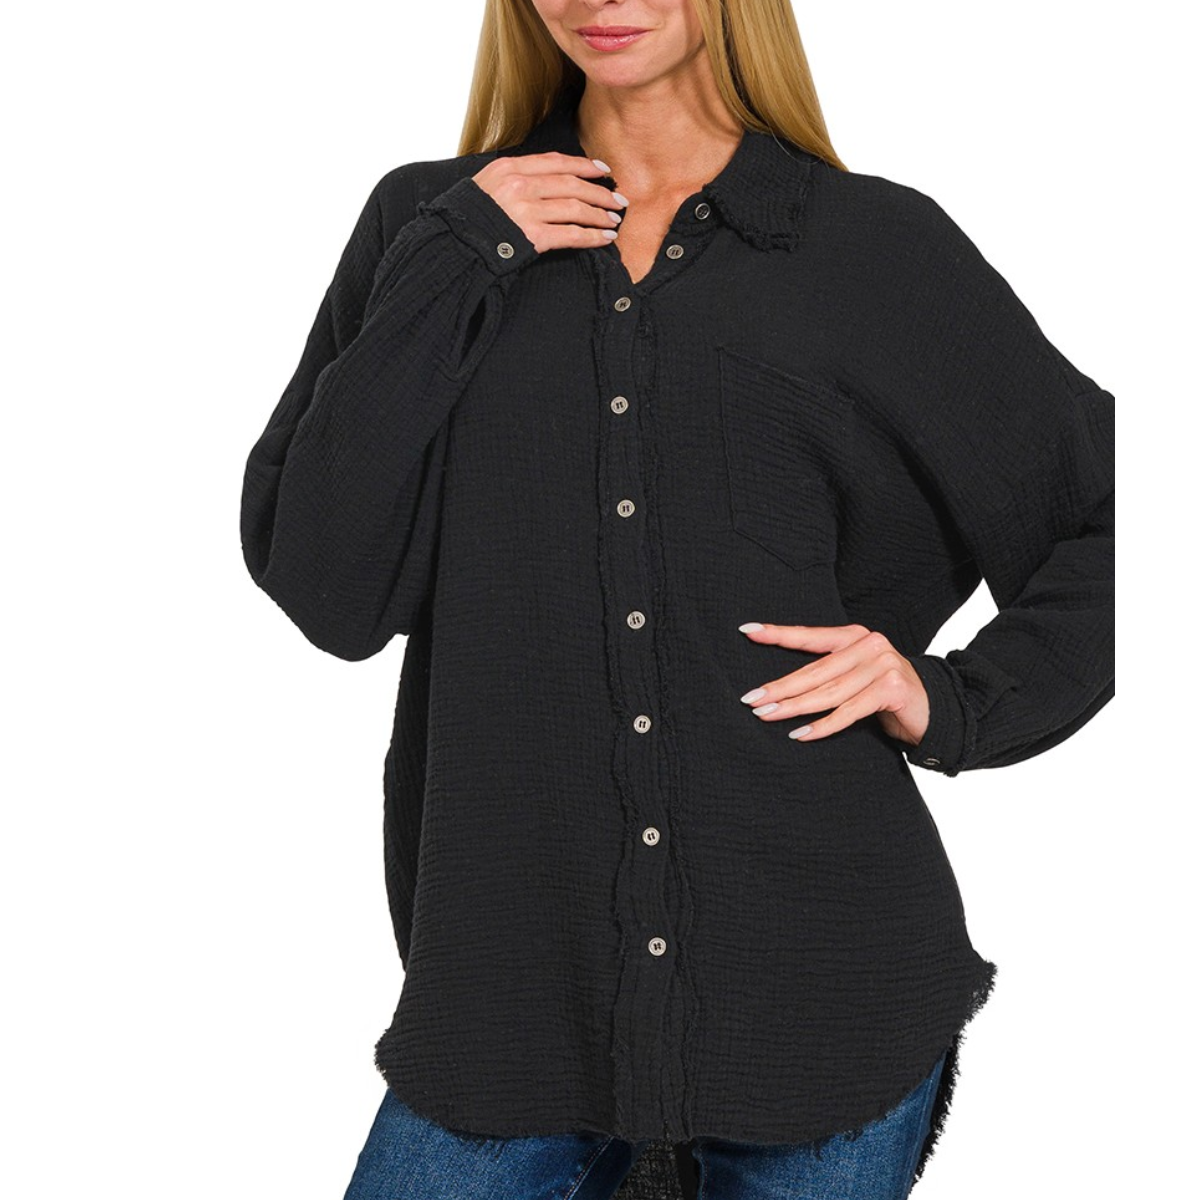 A woman wearing a black long sleeve Gauze Oversized Raw Edge Button Up Shirt made by FASHION GO.